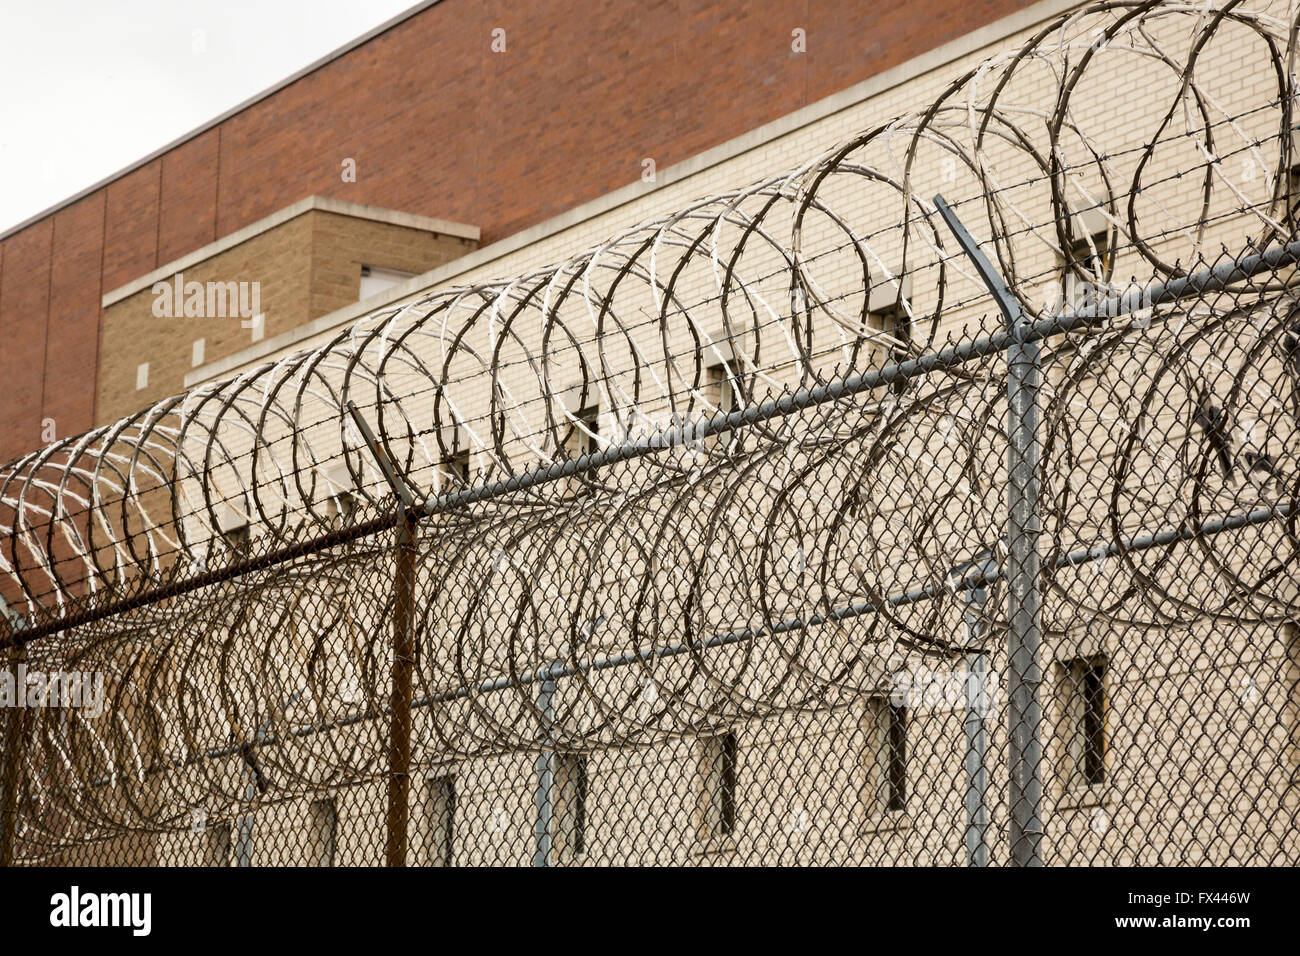 Chicago, Illinois - The Cook County Jail. With about 9,000 prisoners, it is the largest jail in the United States. Stock Photo